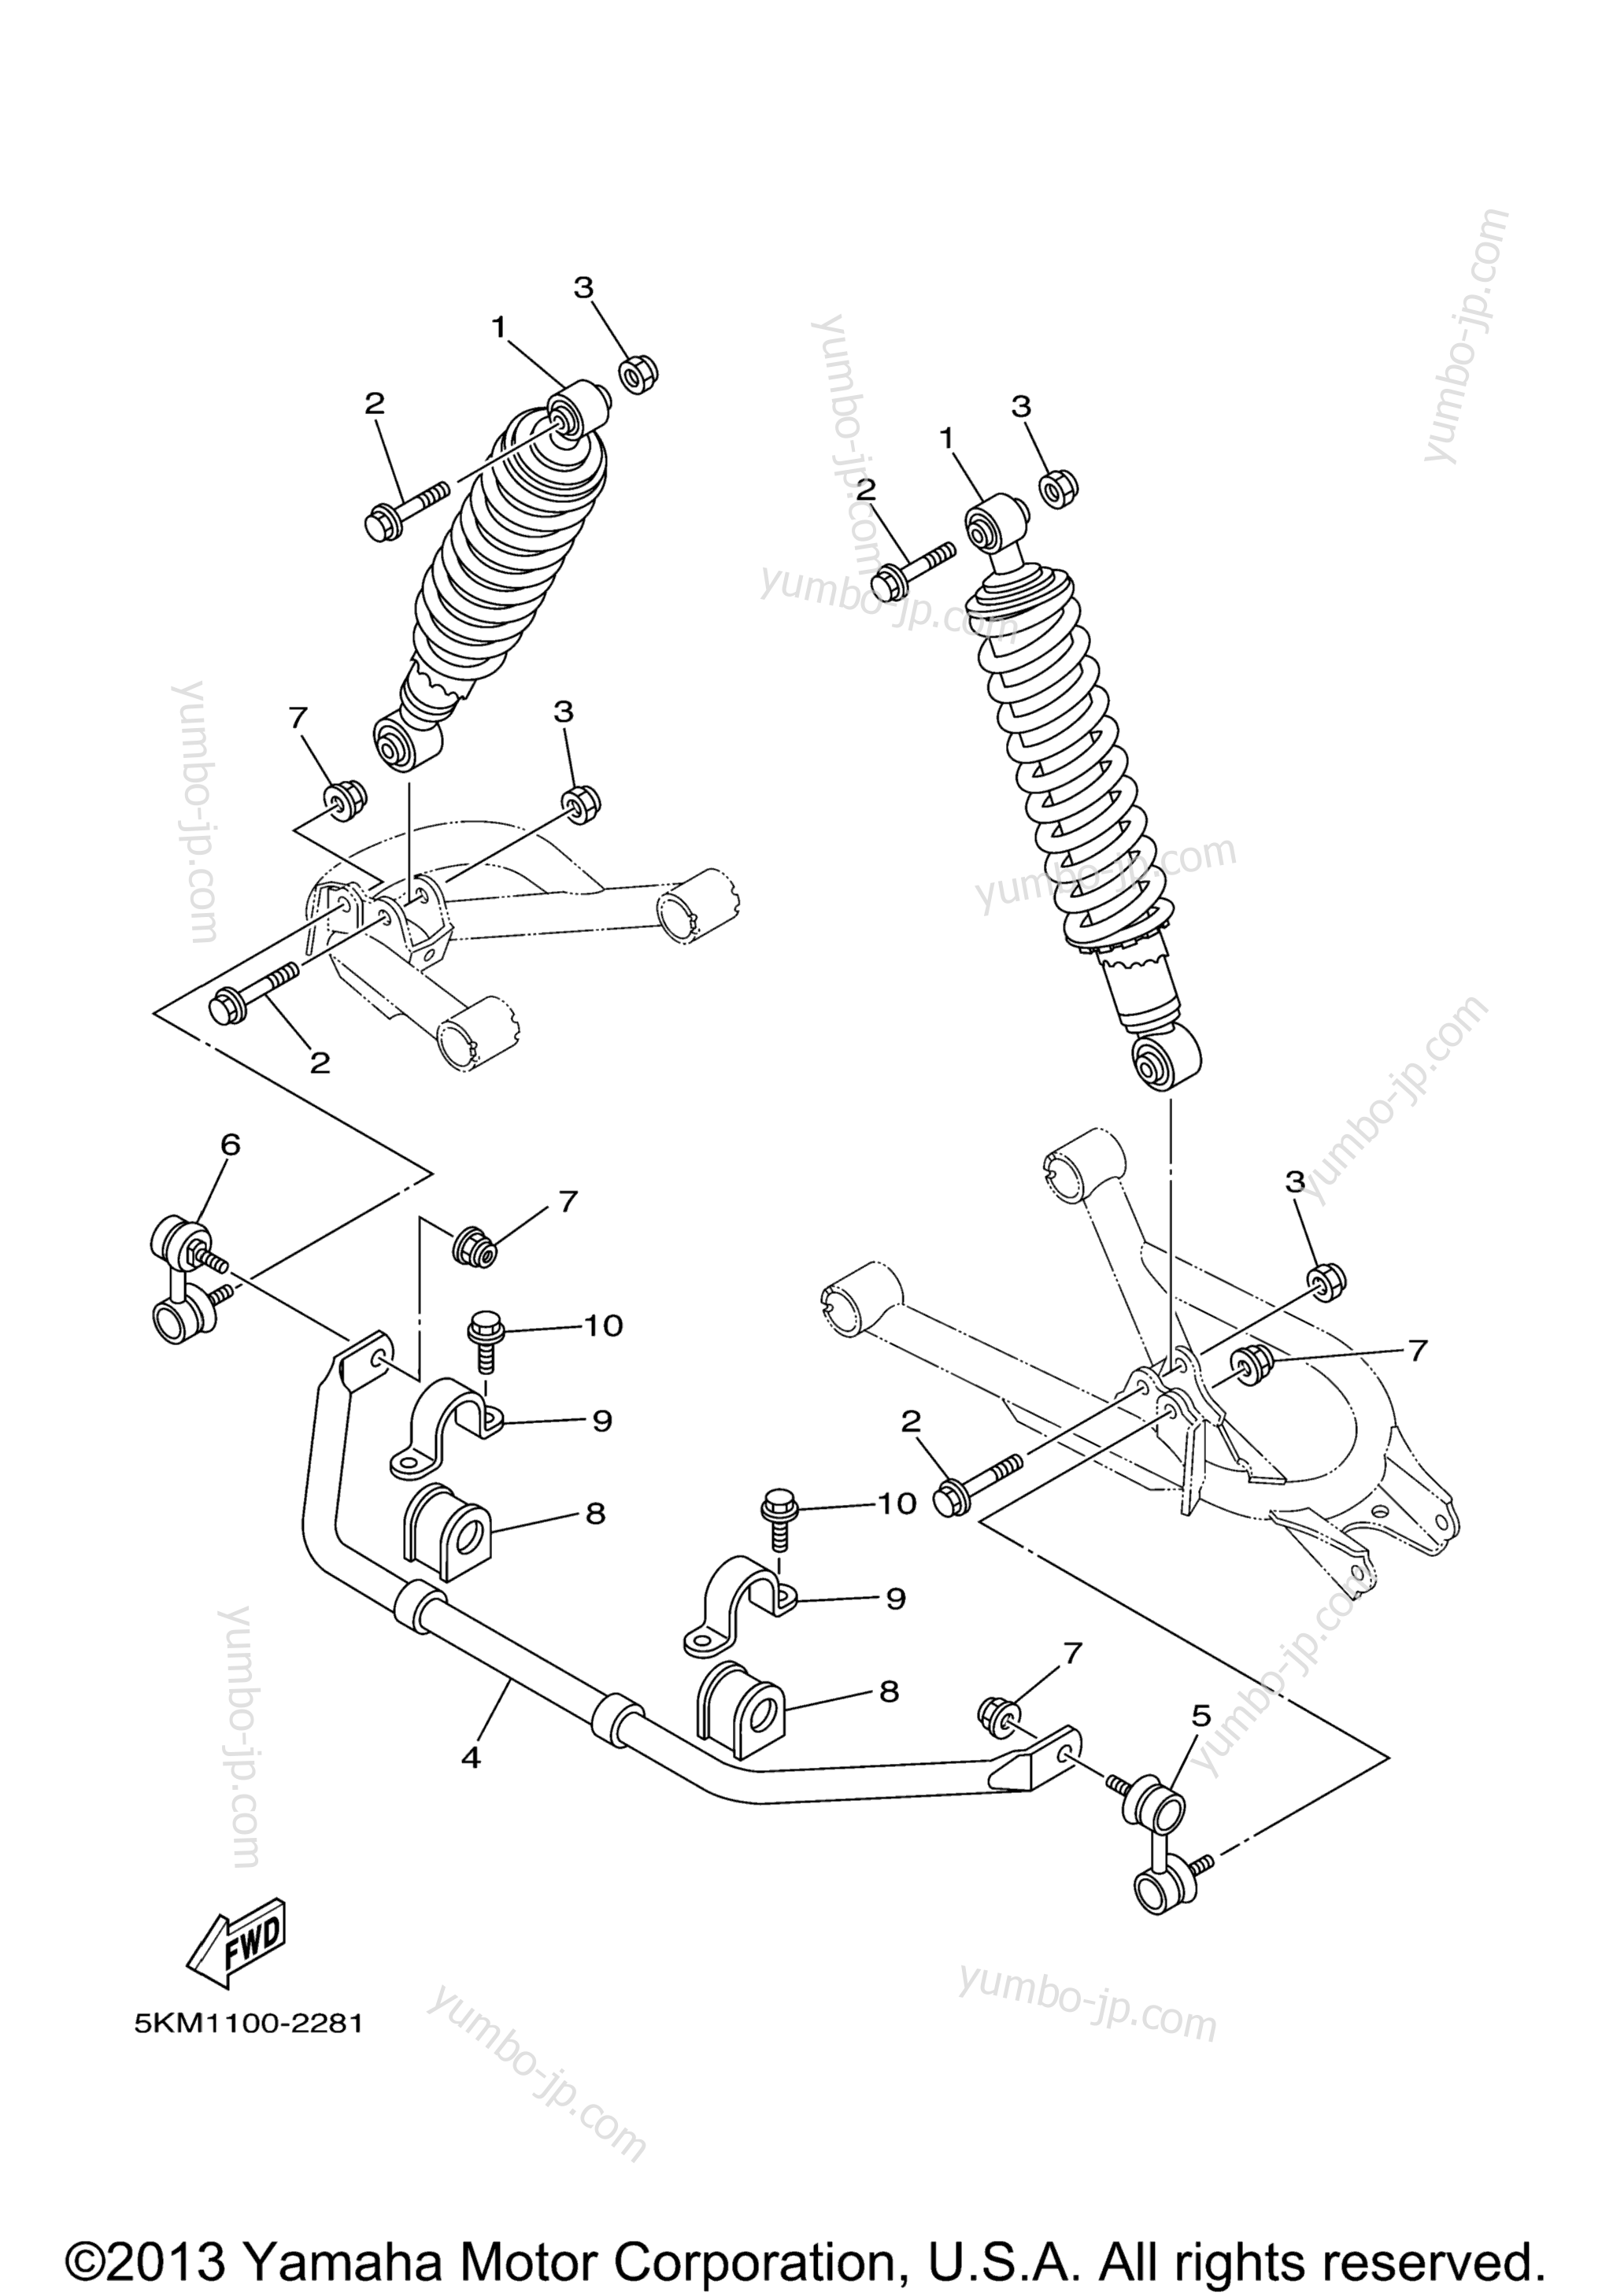 Rear Suspension for ATVs YAMAHA GRIZZLY 660 (YFM66FGXL) 2008 year